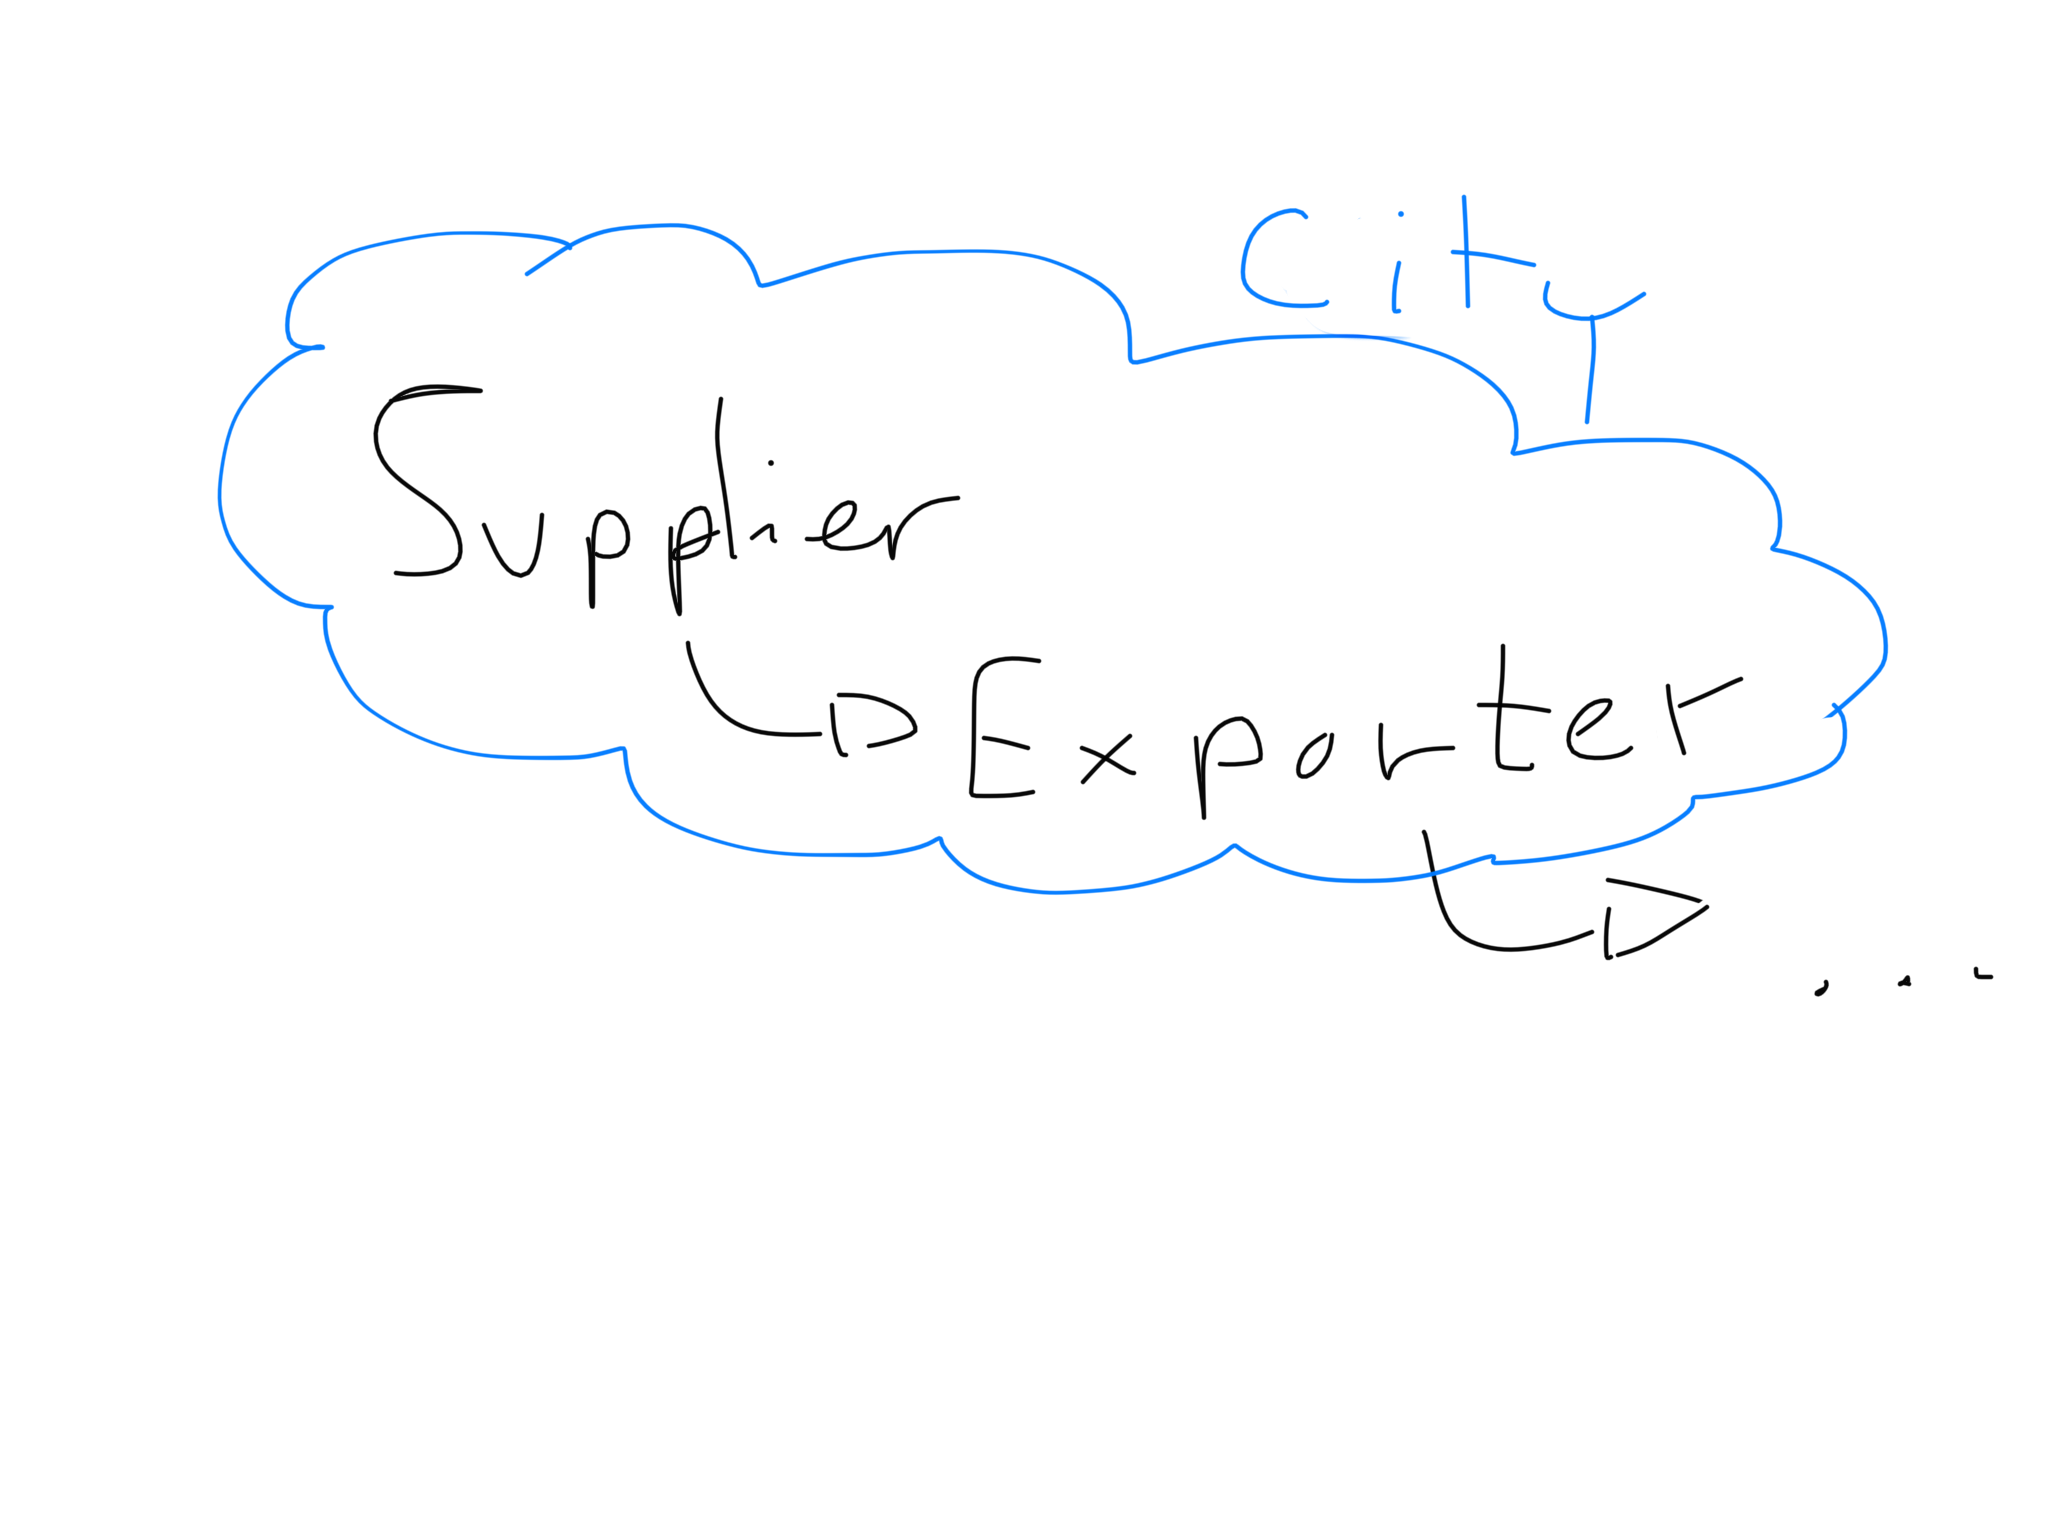 The supplier-exporter cycle